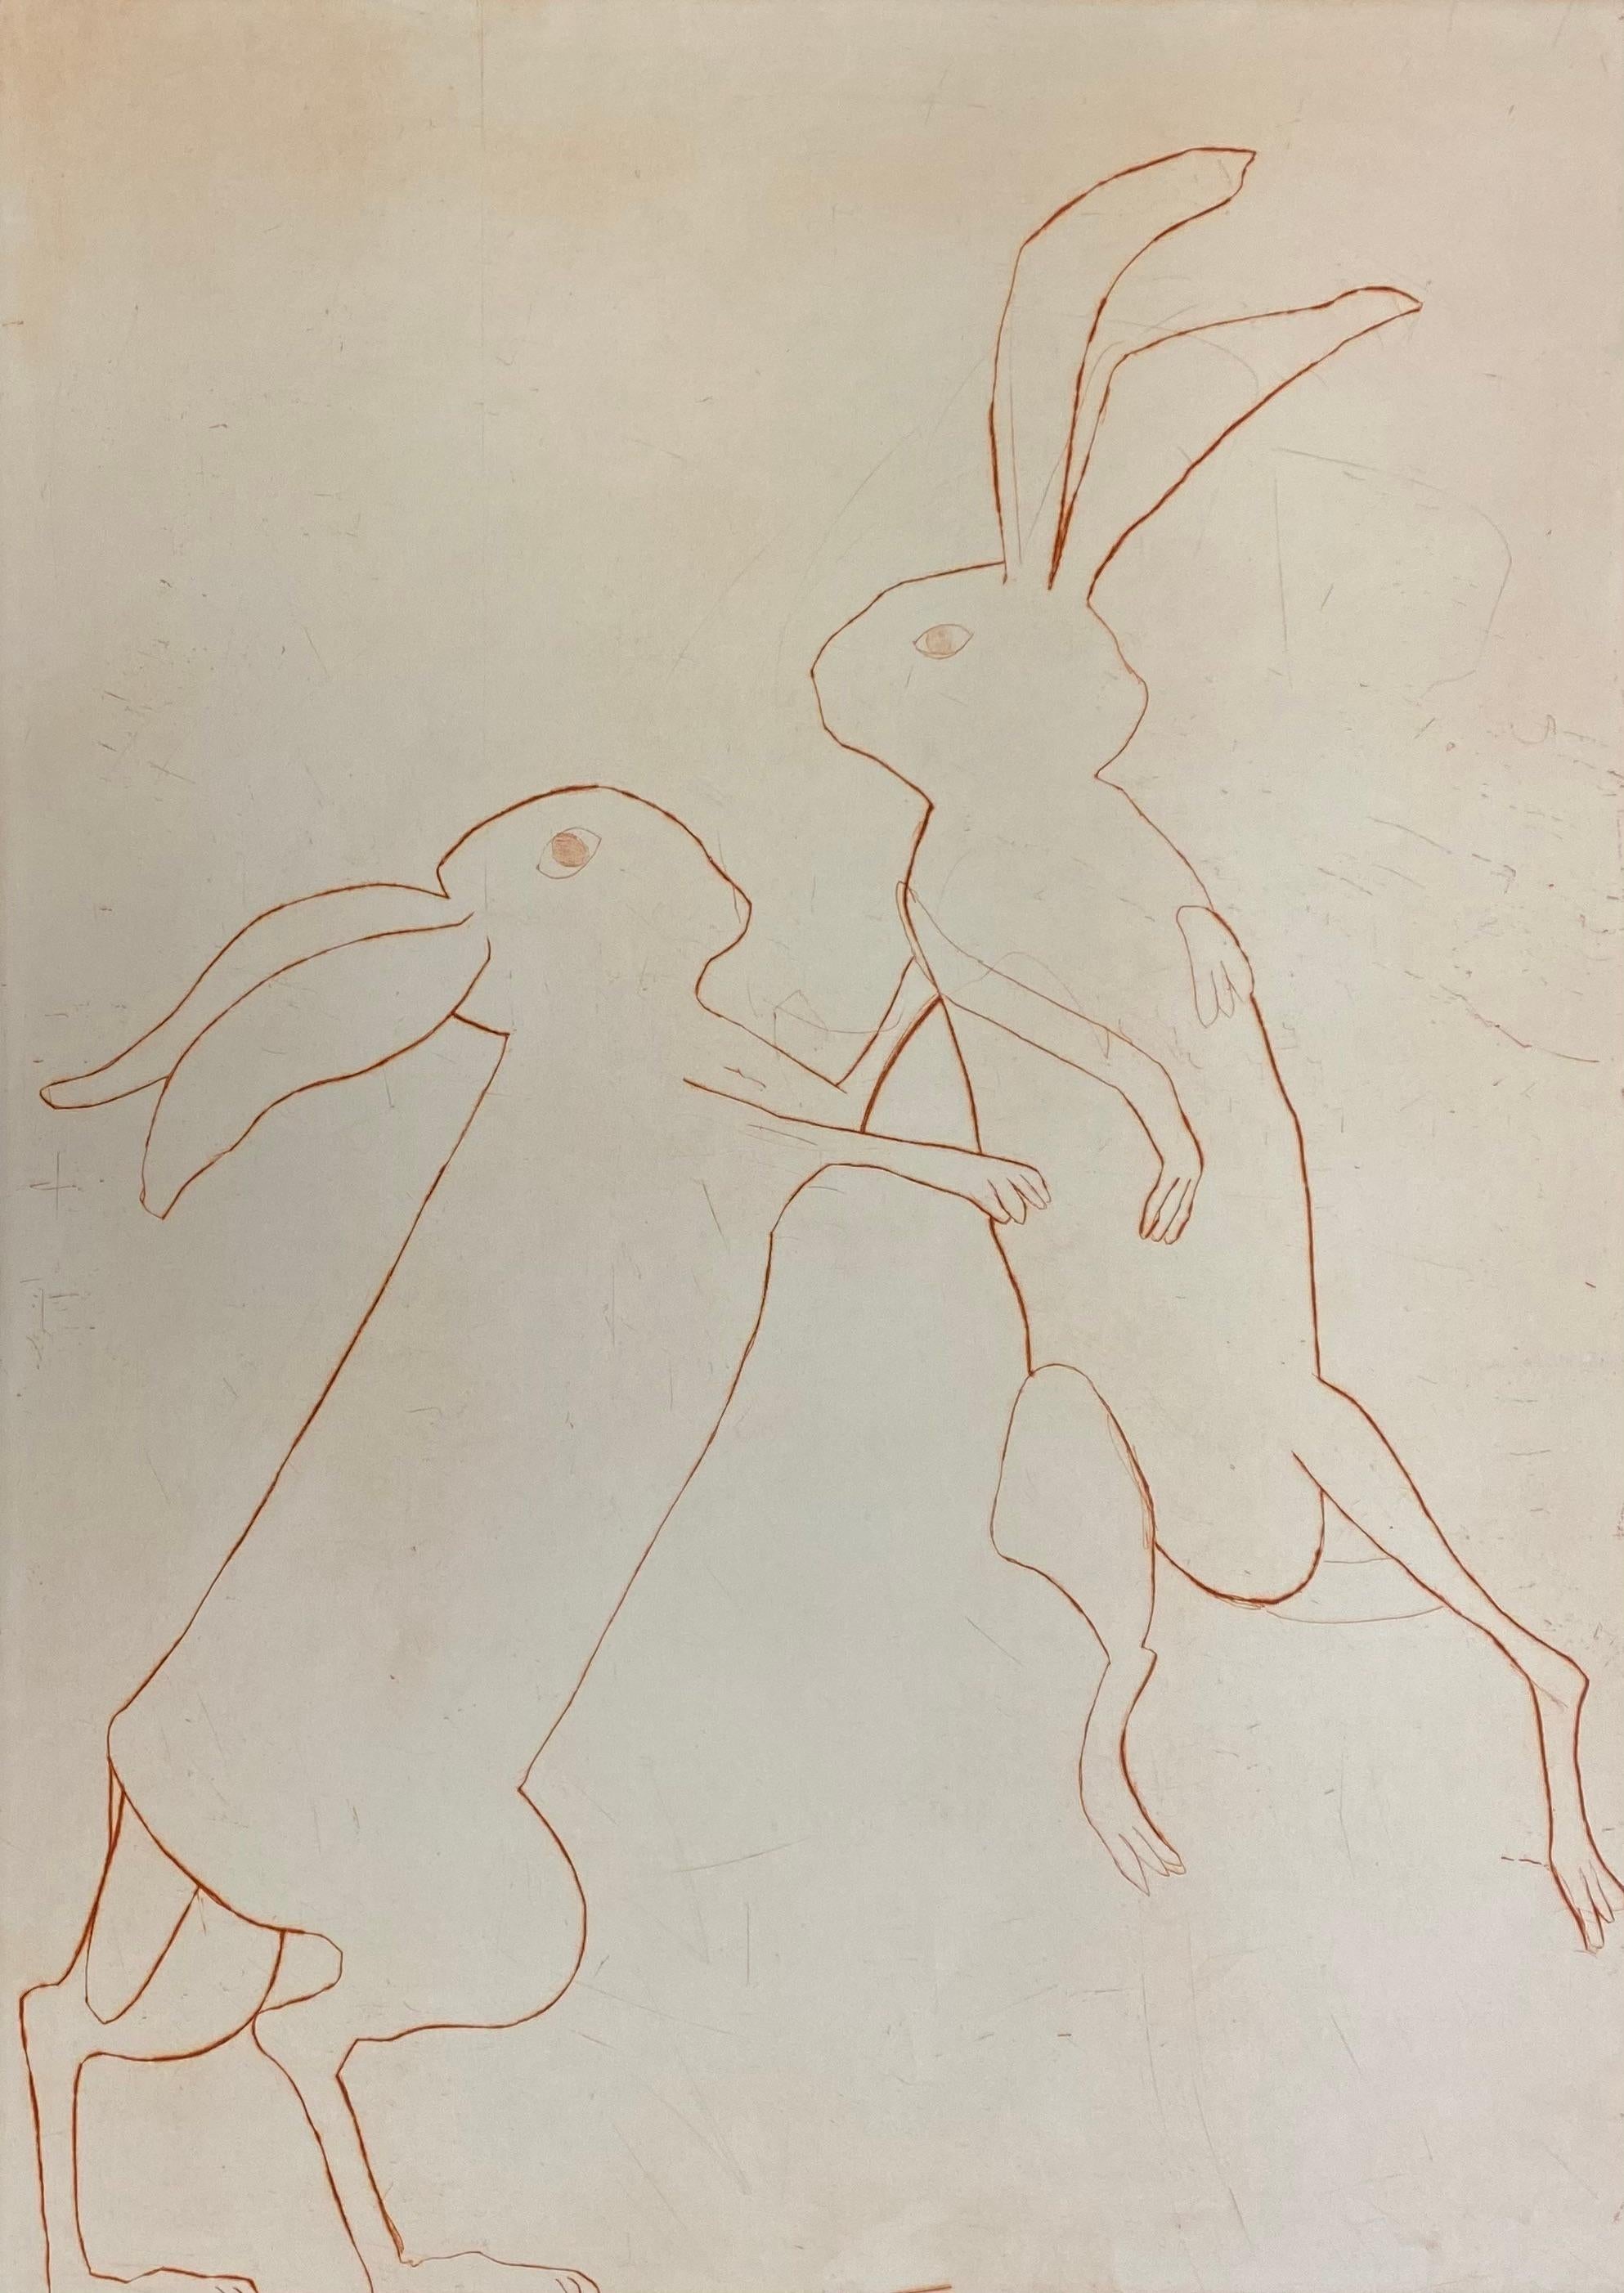 Kate Boxer – Boxing Hares.
Limited edition print, drypoint.
Image Size: H:99CM X W:70.5CM
Sheet Size: H:109CM X W:80.5CM

The sizes do vary slightly and each work is unique so vary in terms of colour as well. Please contact us before buying if you